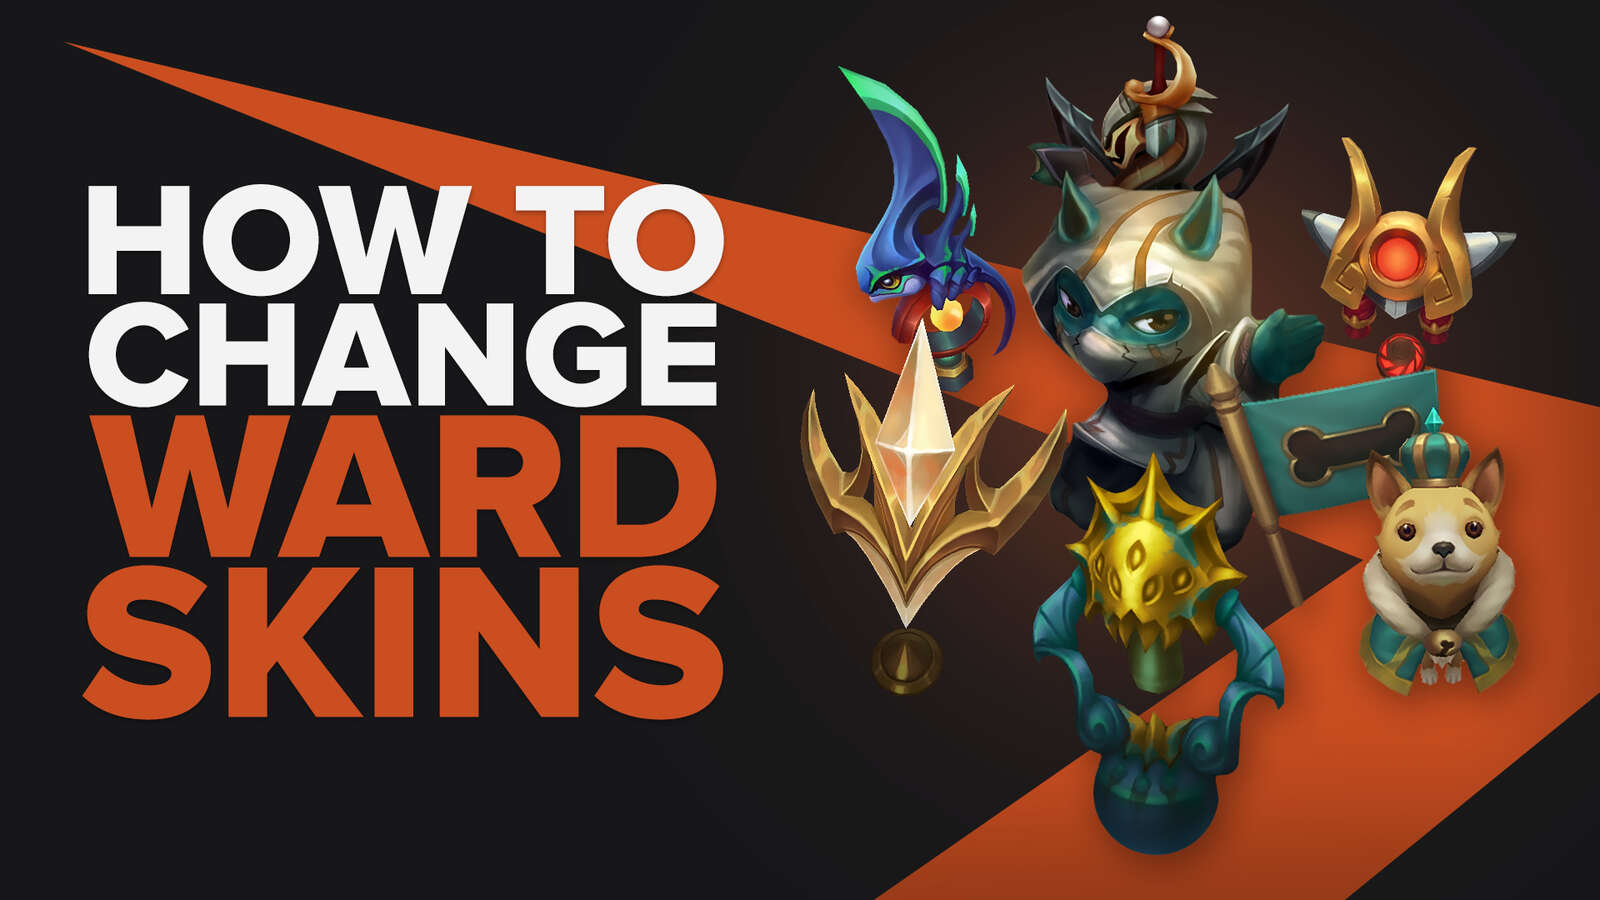 How To Change Ward Skins in League of Legends